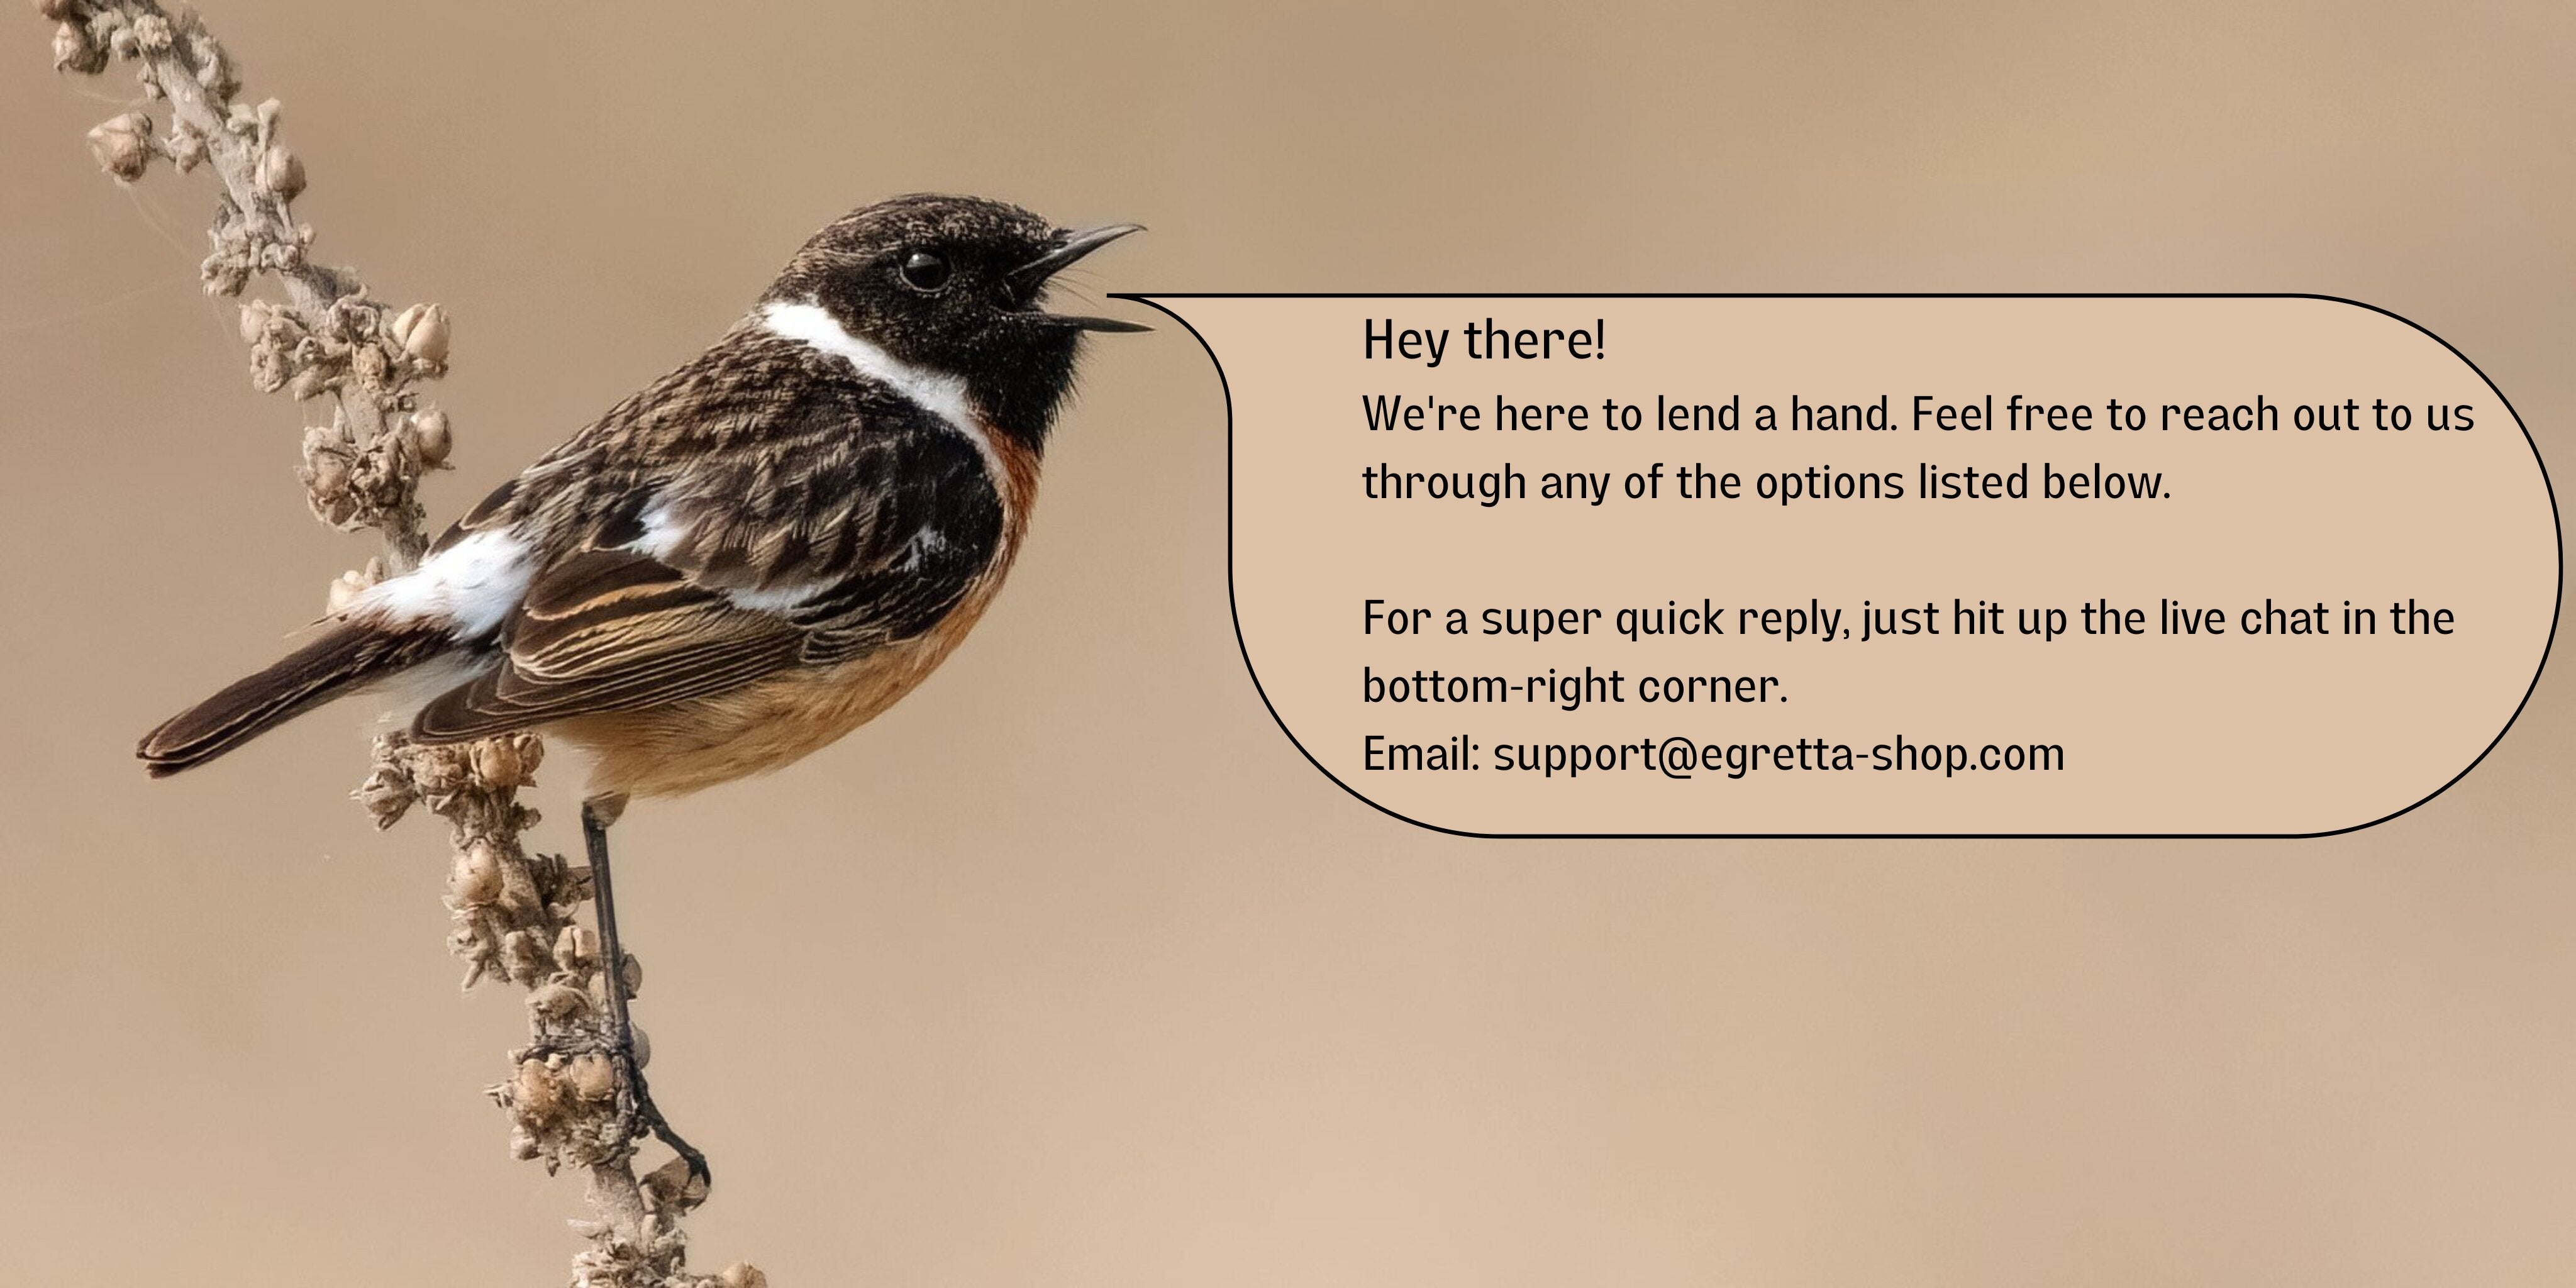 European stonechat is singing the contact info of Egretta.